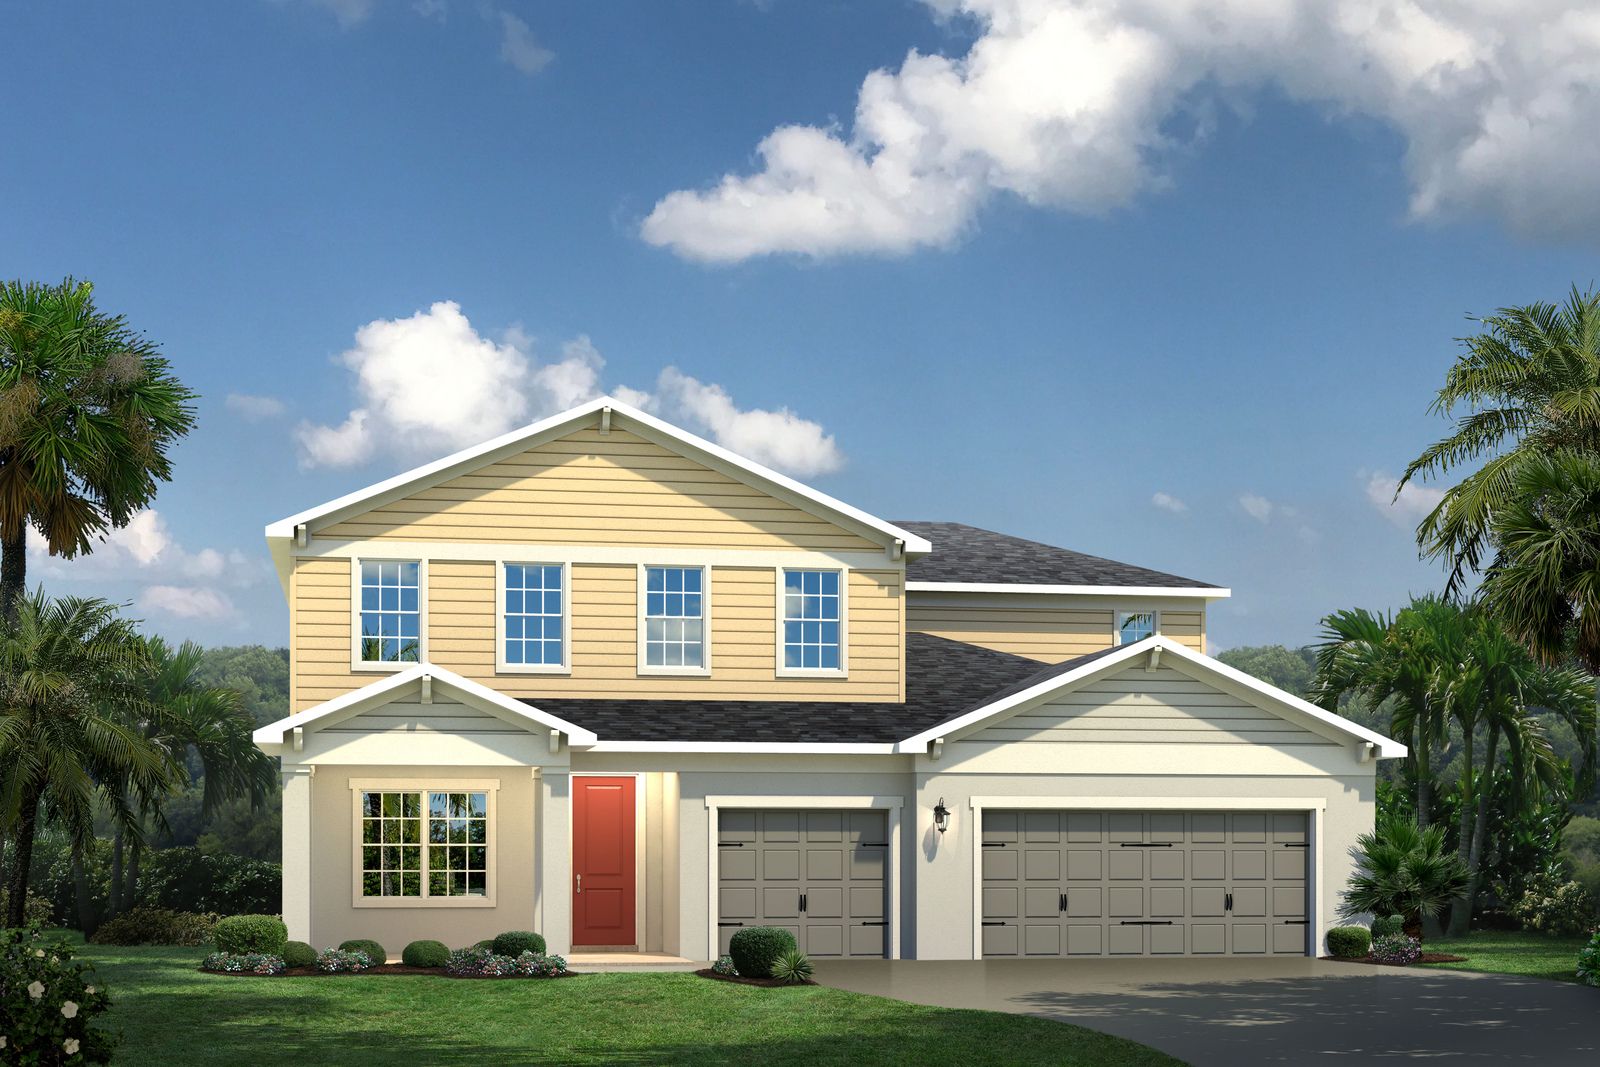 LAST CHANCE TO OWN A NEW RYAN HOME AT ARDEN.